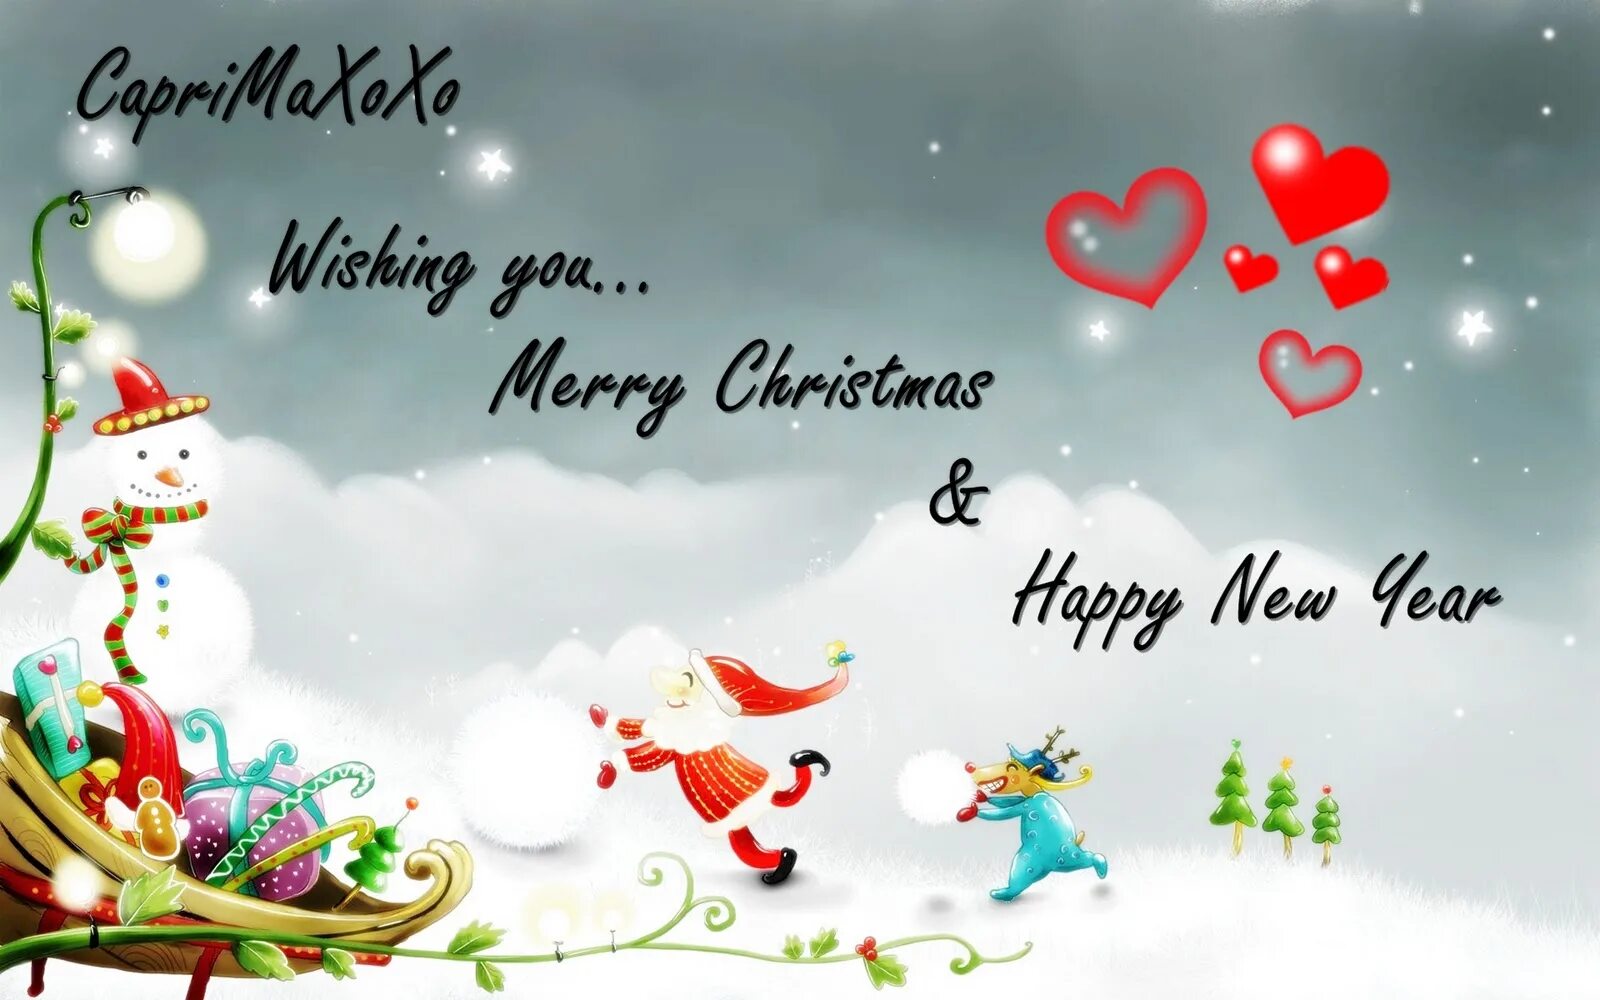 Happy new year be happy. Merry Christmas and Happy New year открытки. Красивые открытки Merry Christmas Wishes. Merry Christmas 2022 открытка красивая. Happy New year and Christmas.